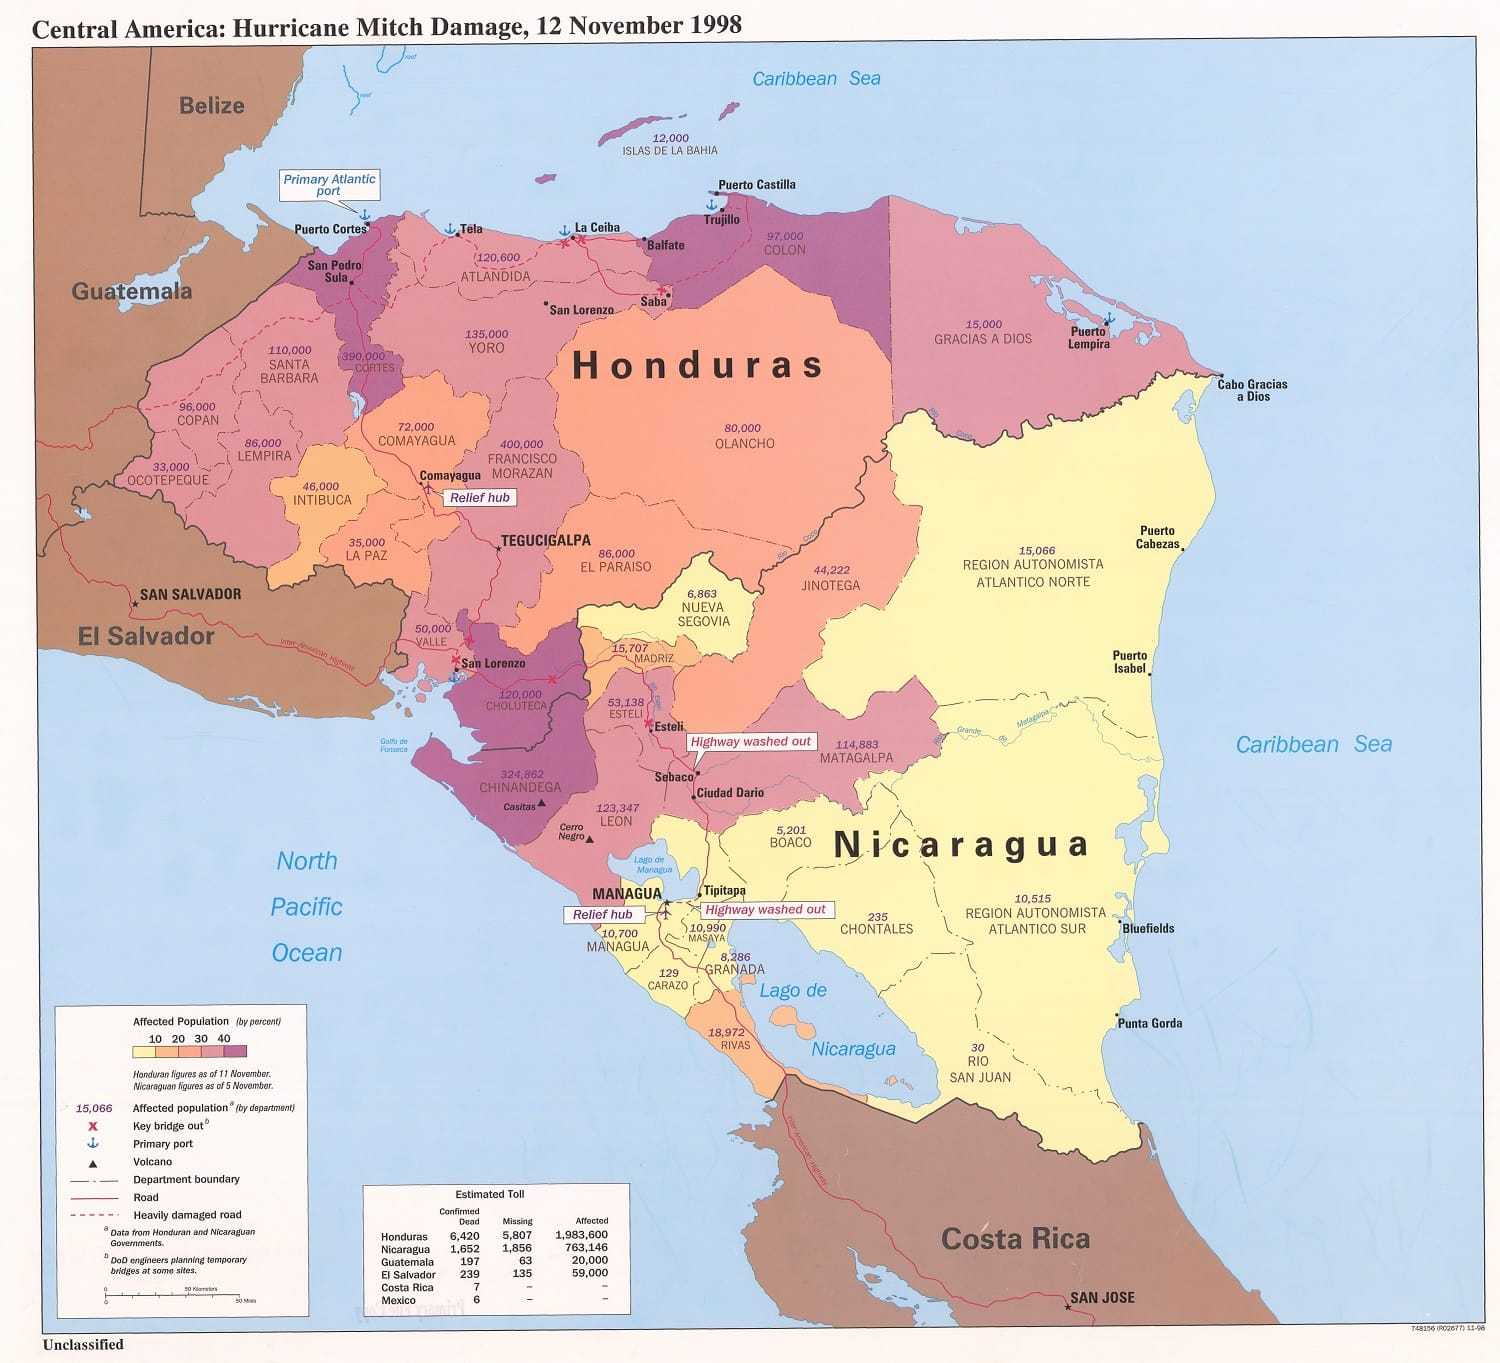 Map of Central America depicting damage from Hurricane Mitch.